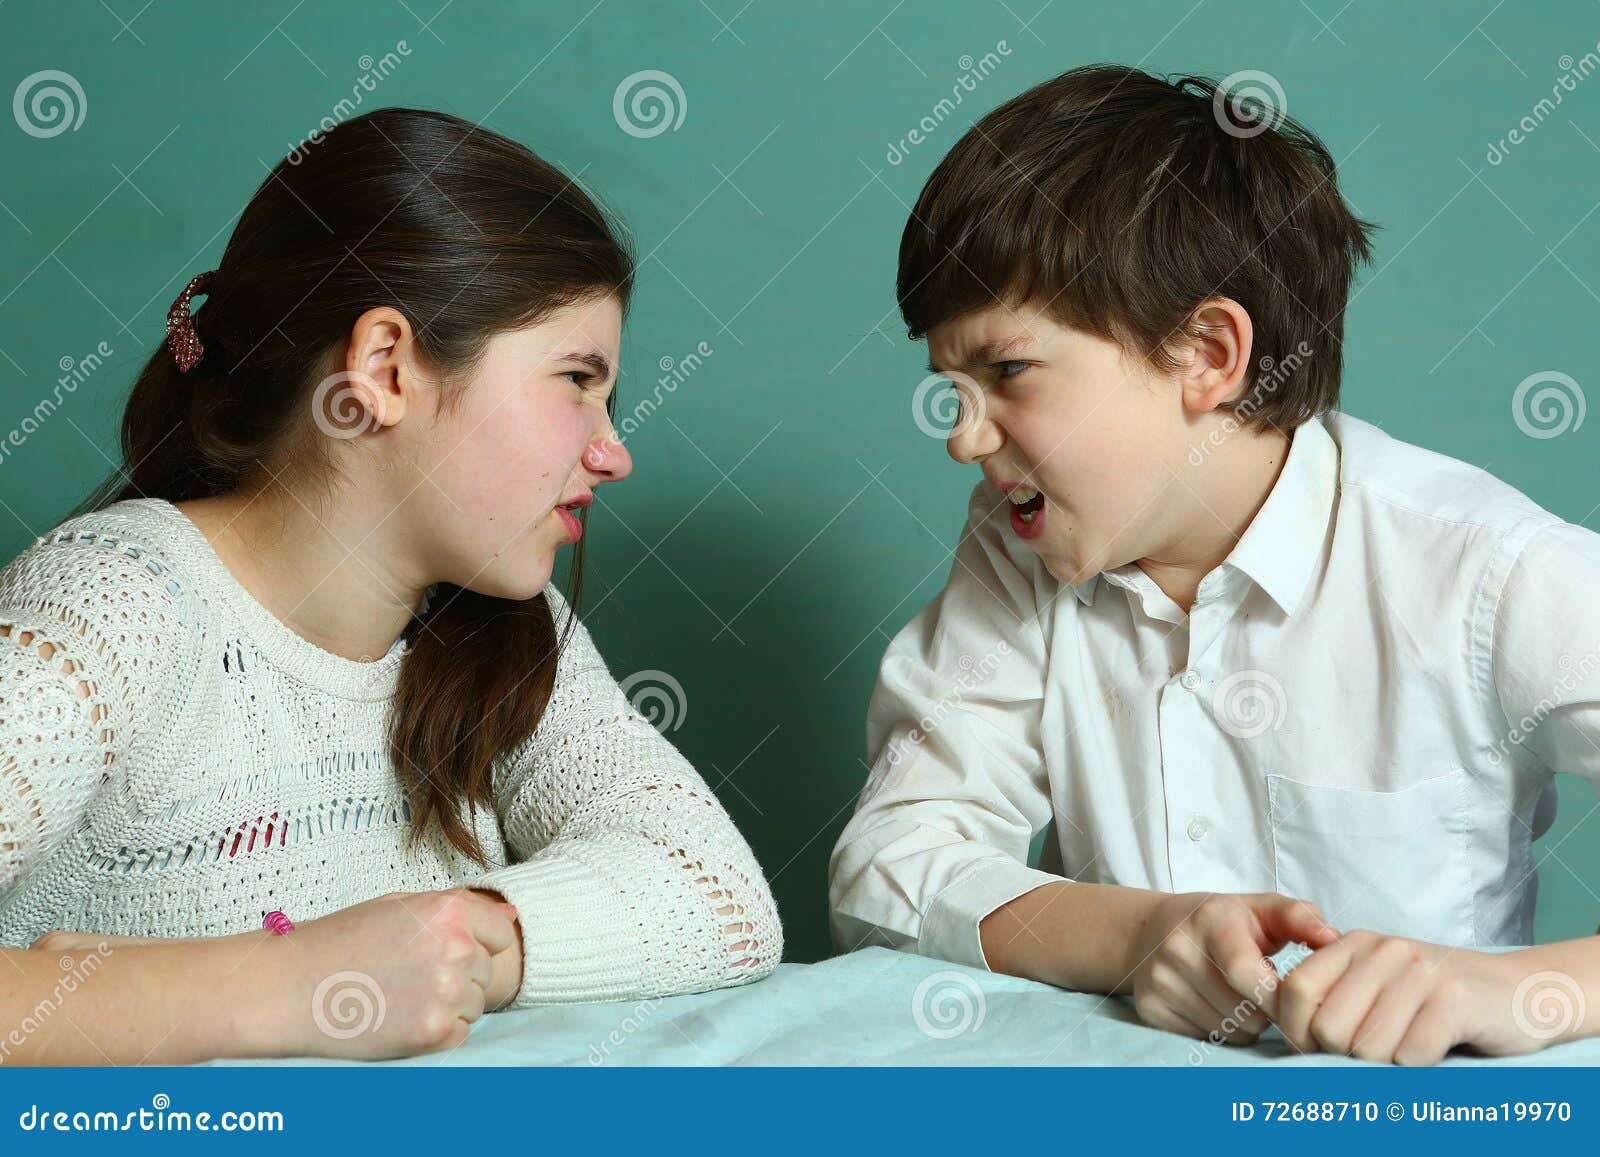 Siblings Brother And Sister Quarreling Stock Photo Image